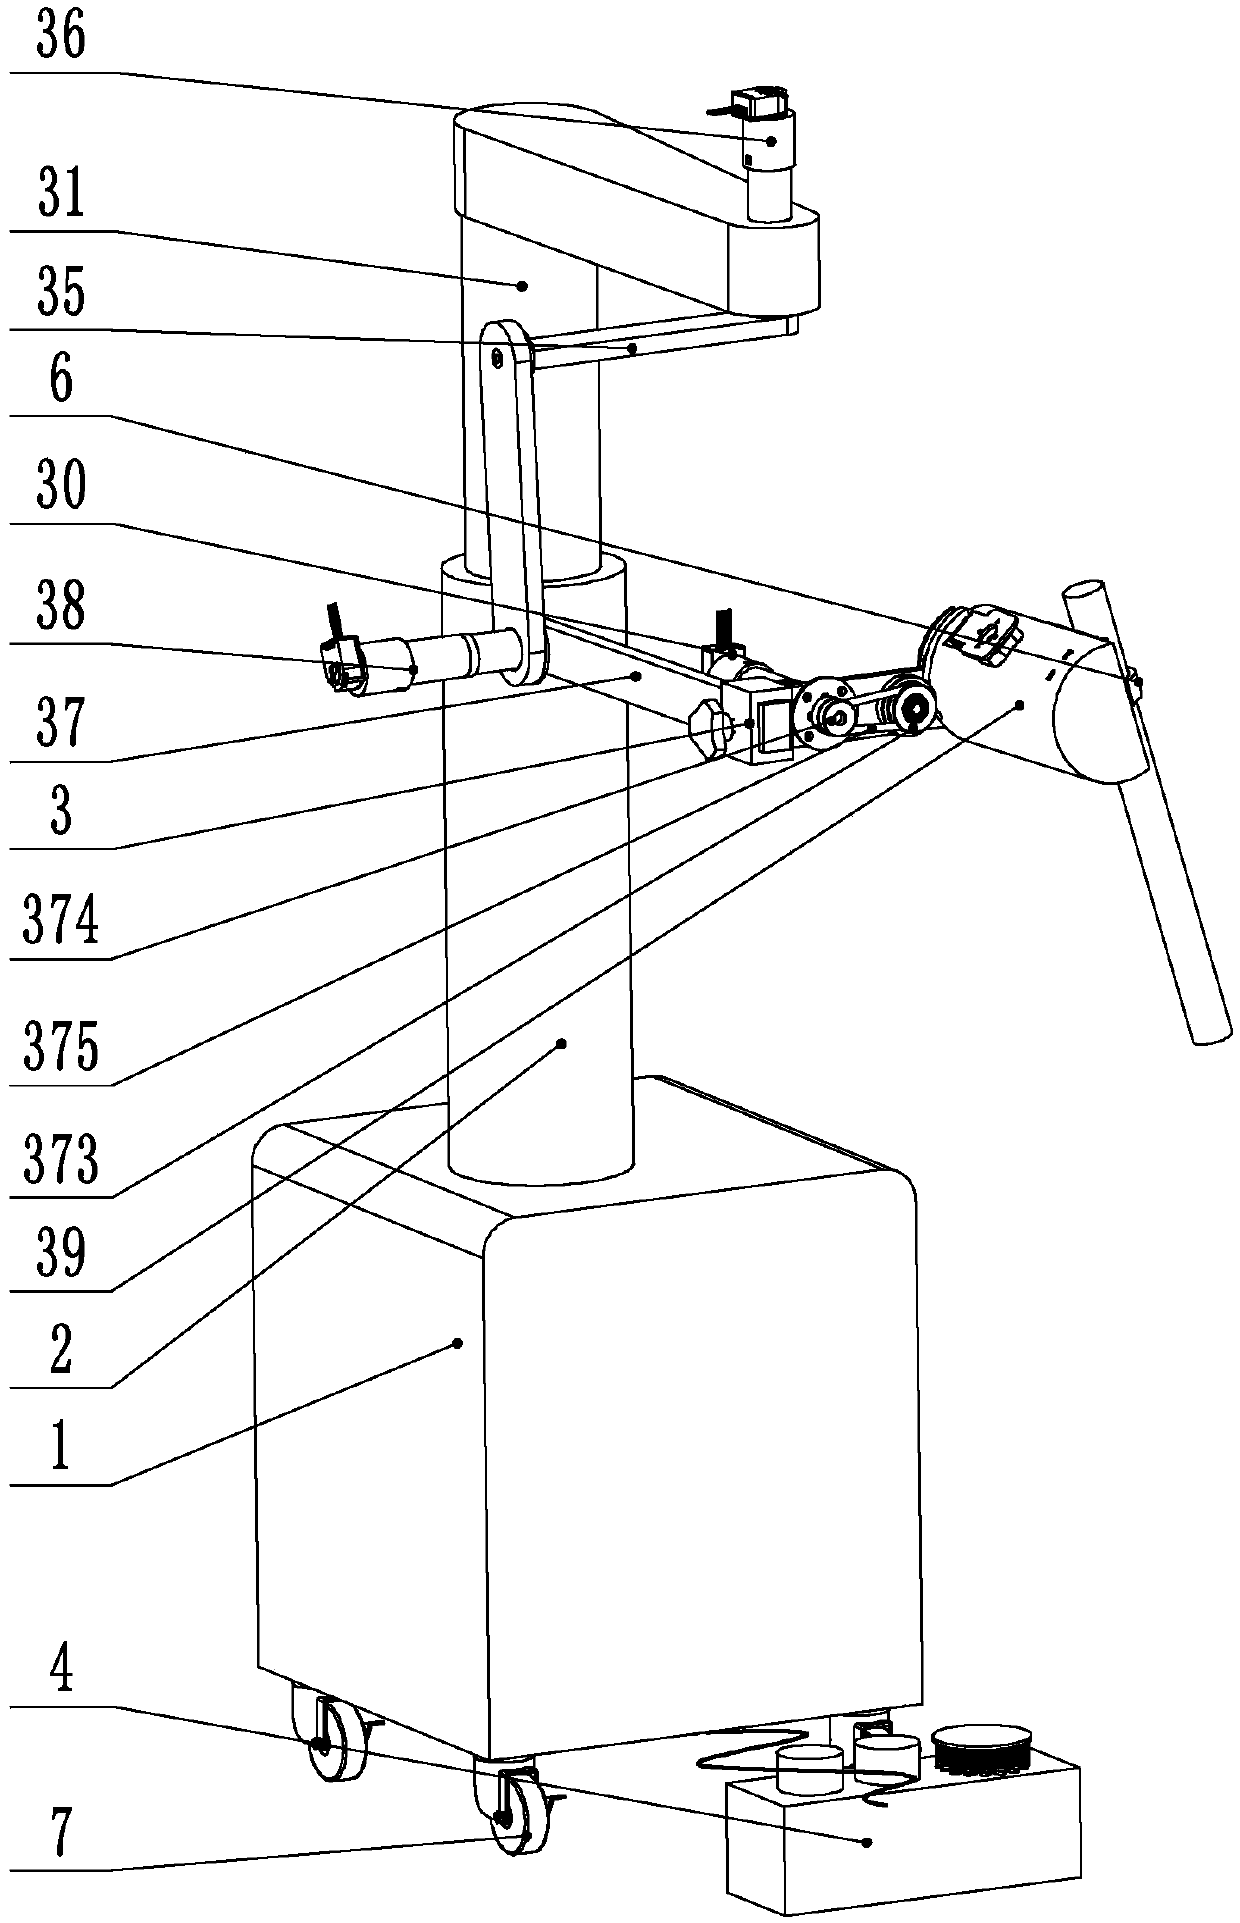 One-man foot-controlled mechanical arm for holding laparoscope